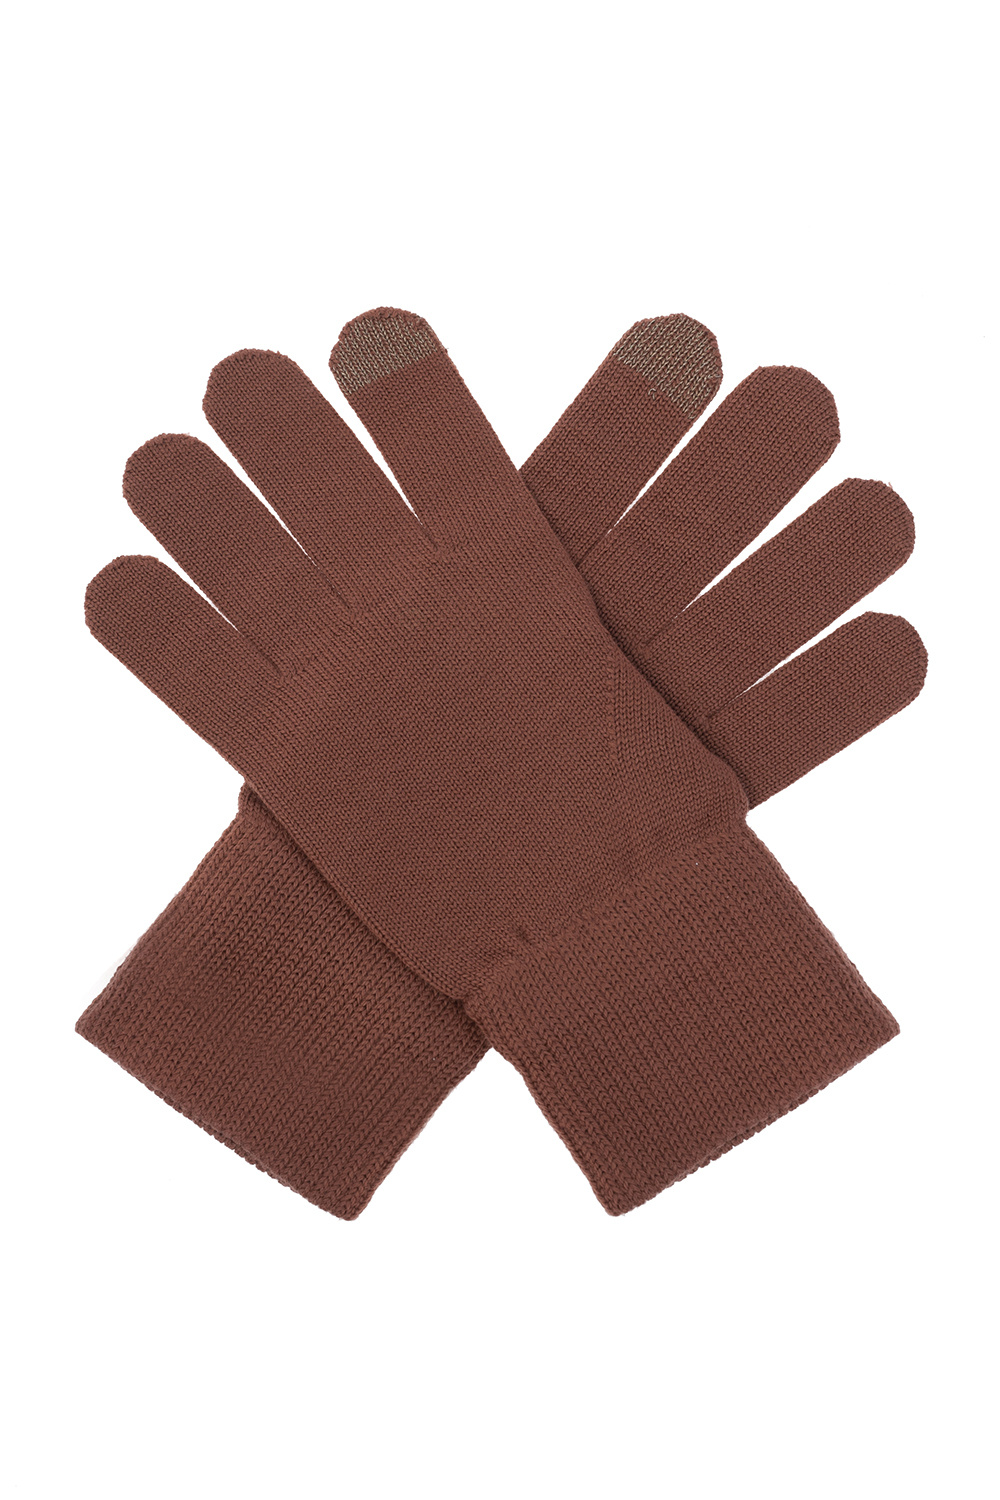 givenchy lock Wool gloves